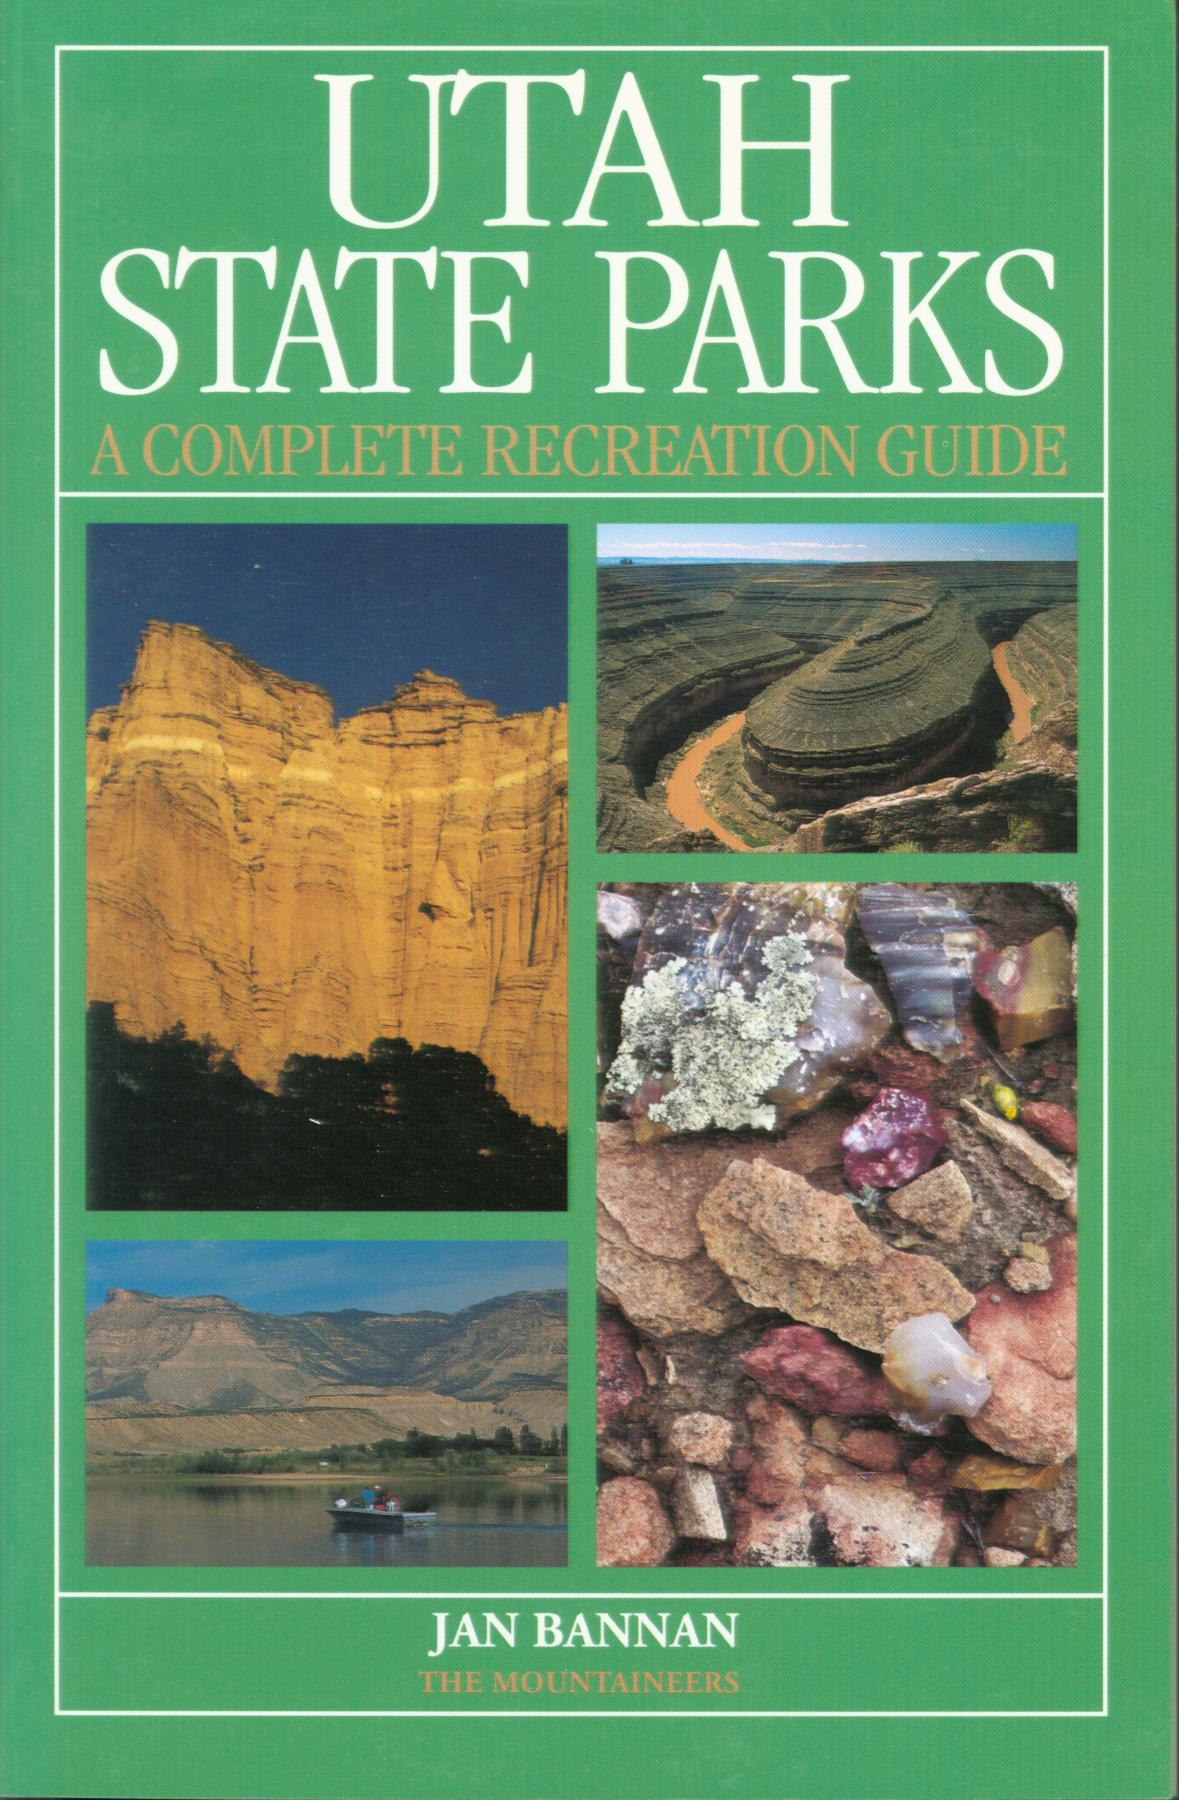 UTAH STATE PARKS: a complete recreation guide.